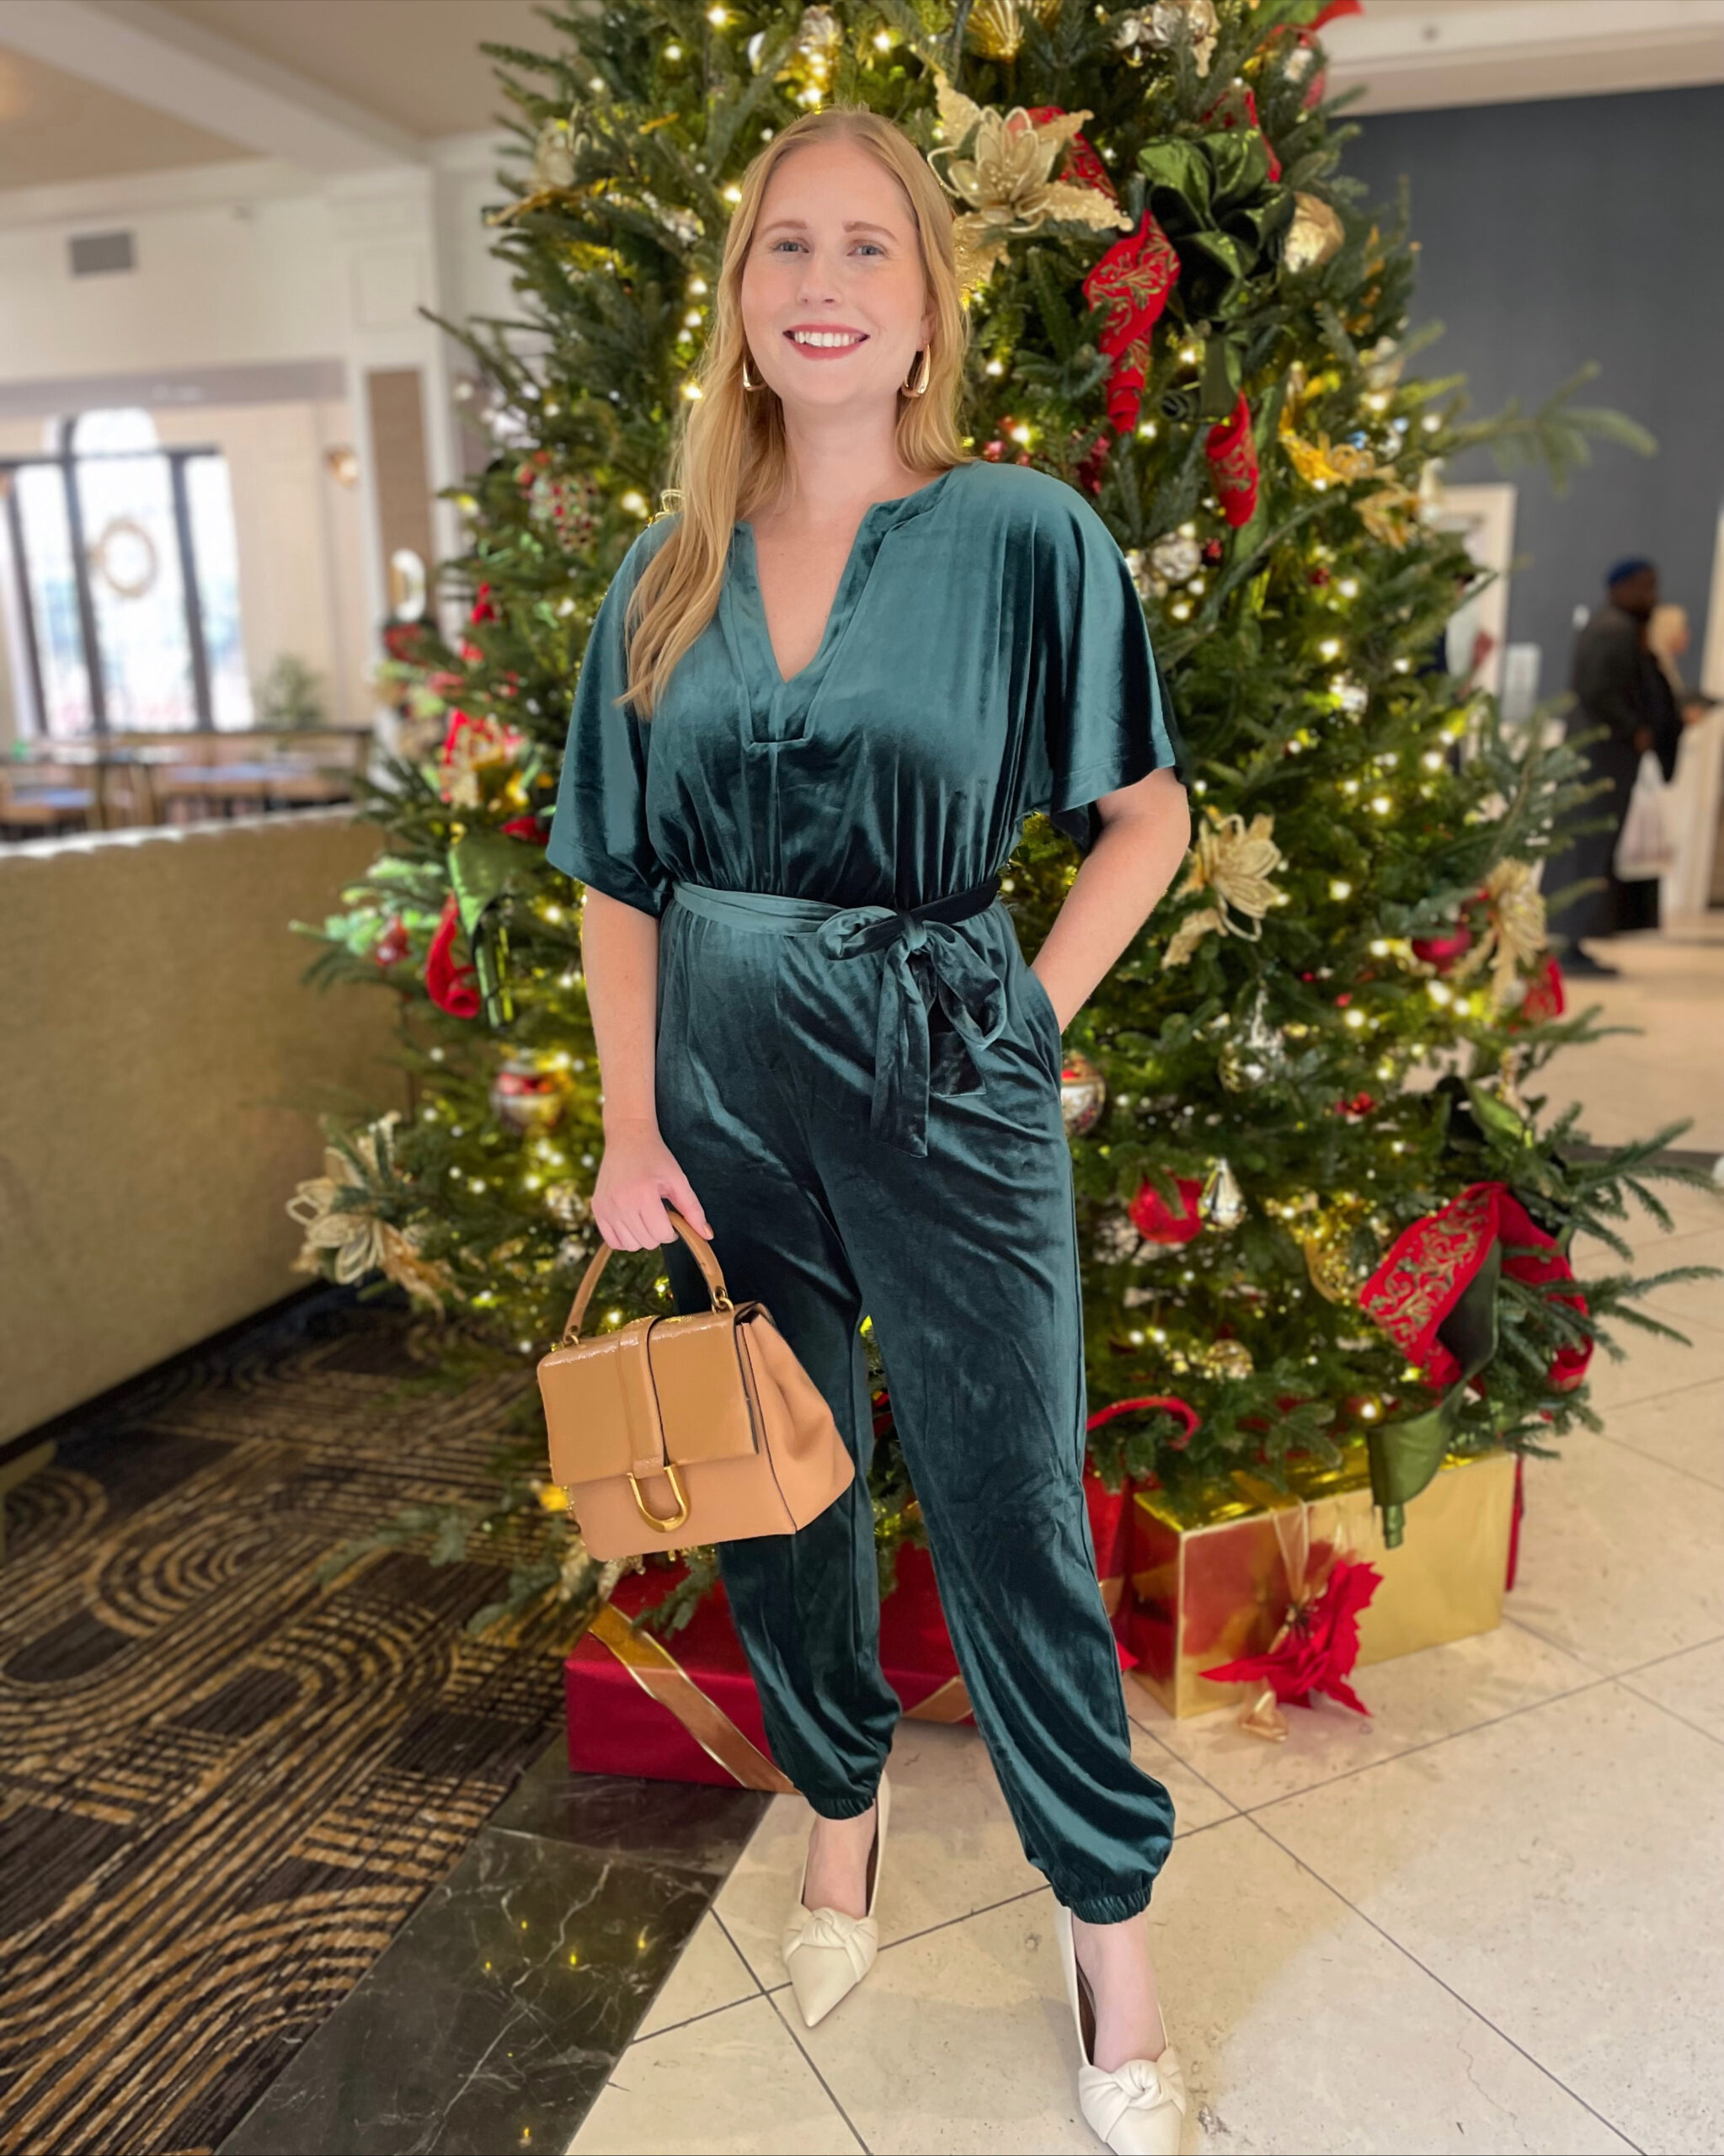 Holiday Outfit Ideas from Walmart - Affordable by Amanda